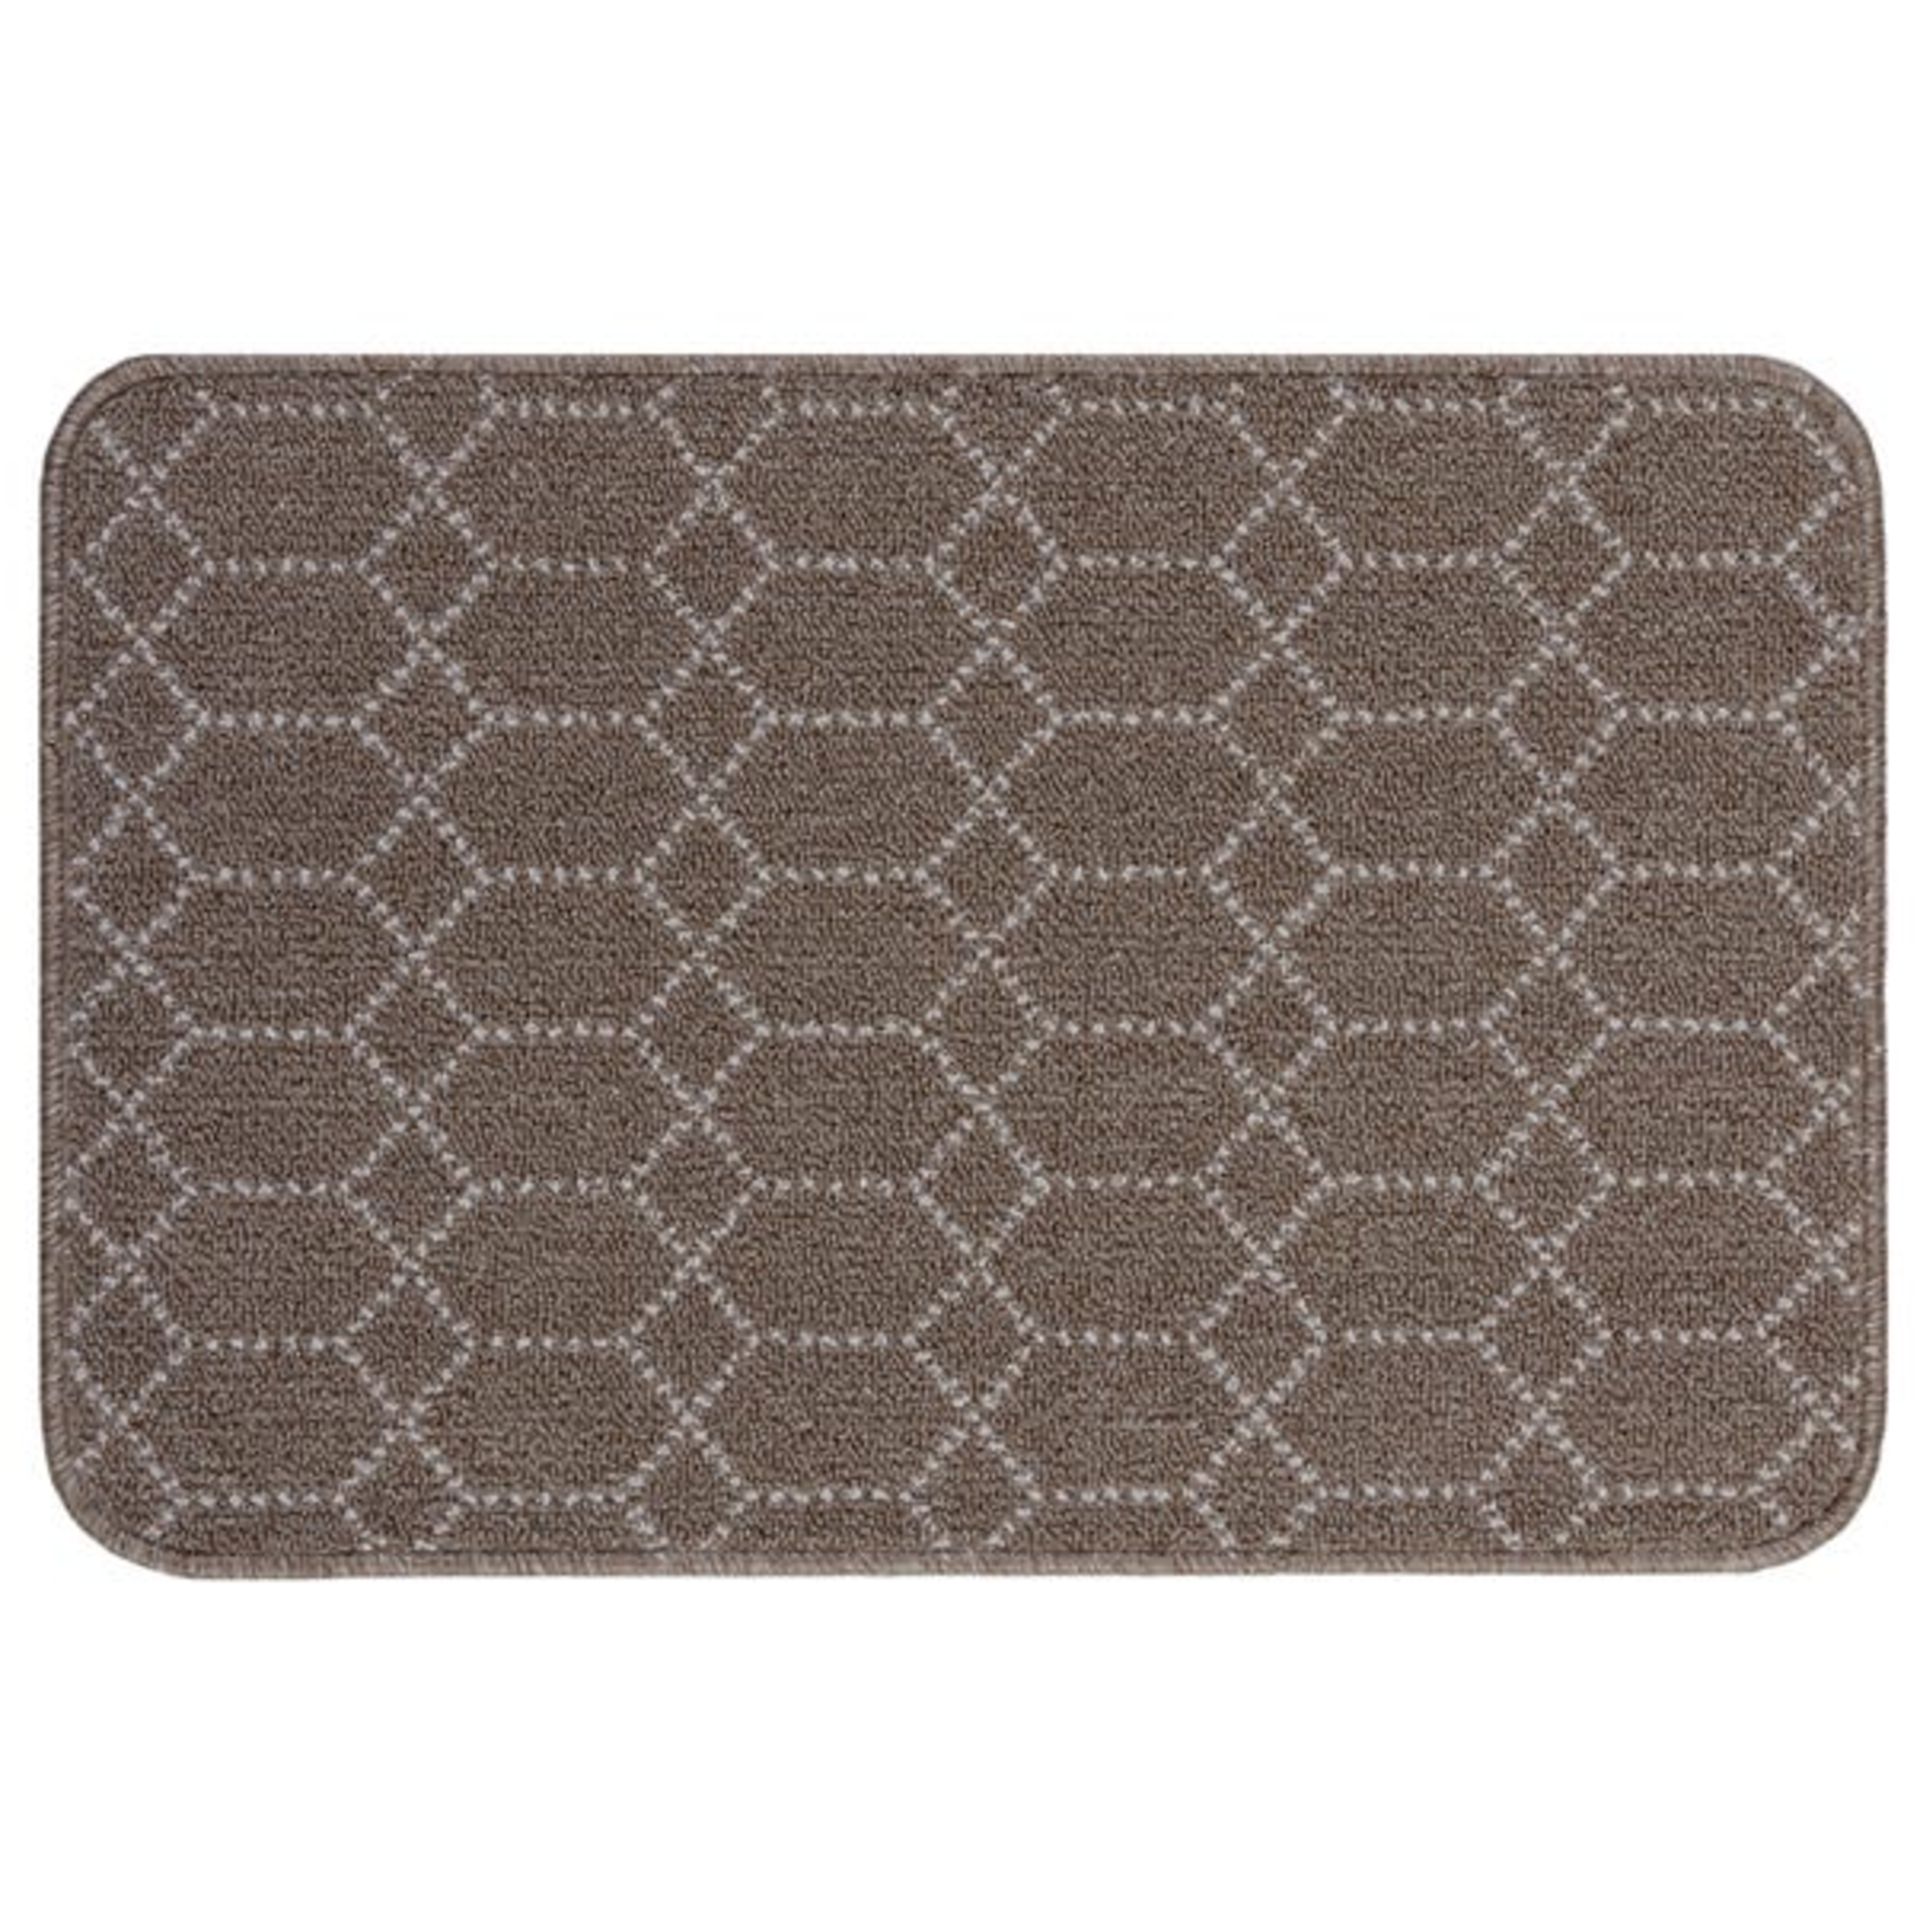 Skyline D040 Rug Orion Washable Natural Rectangle 50X75cm RRP 12 About the Product(s) Skyline D040